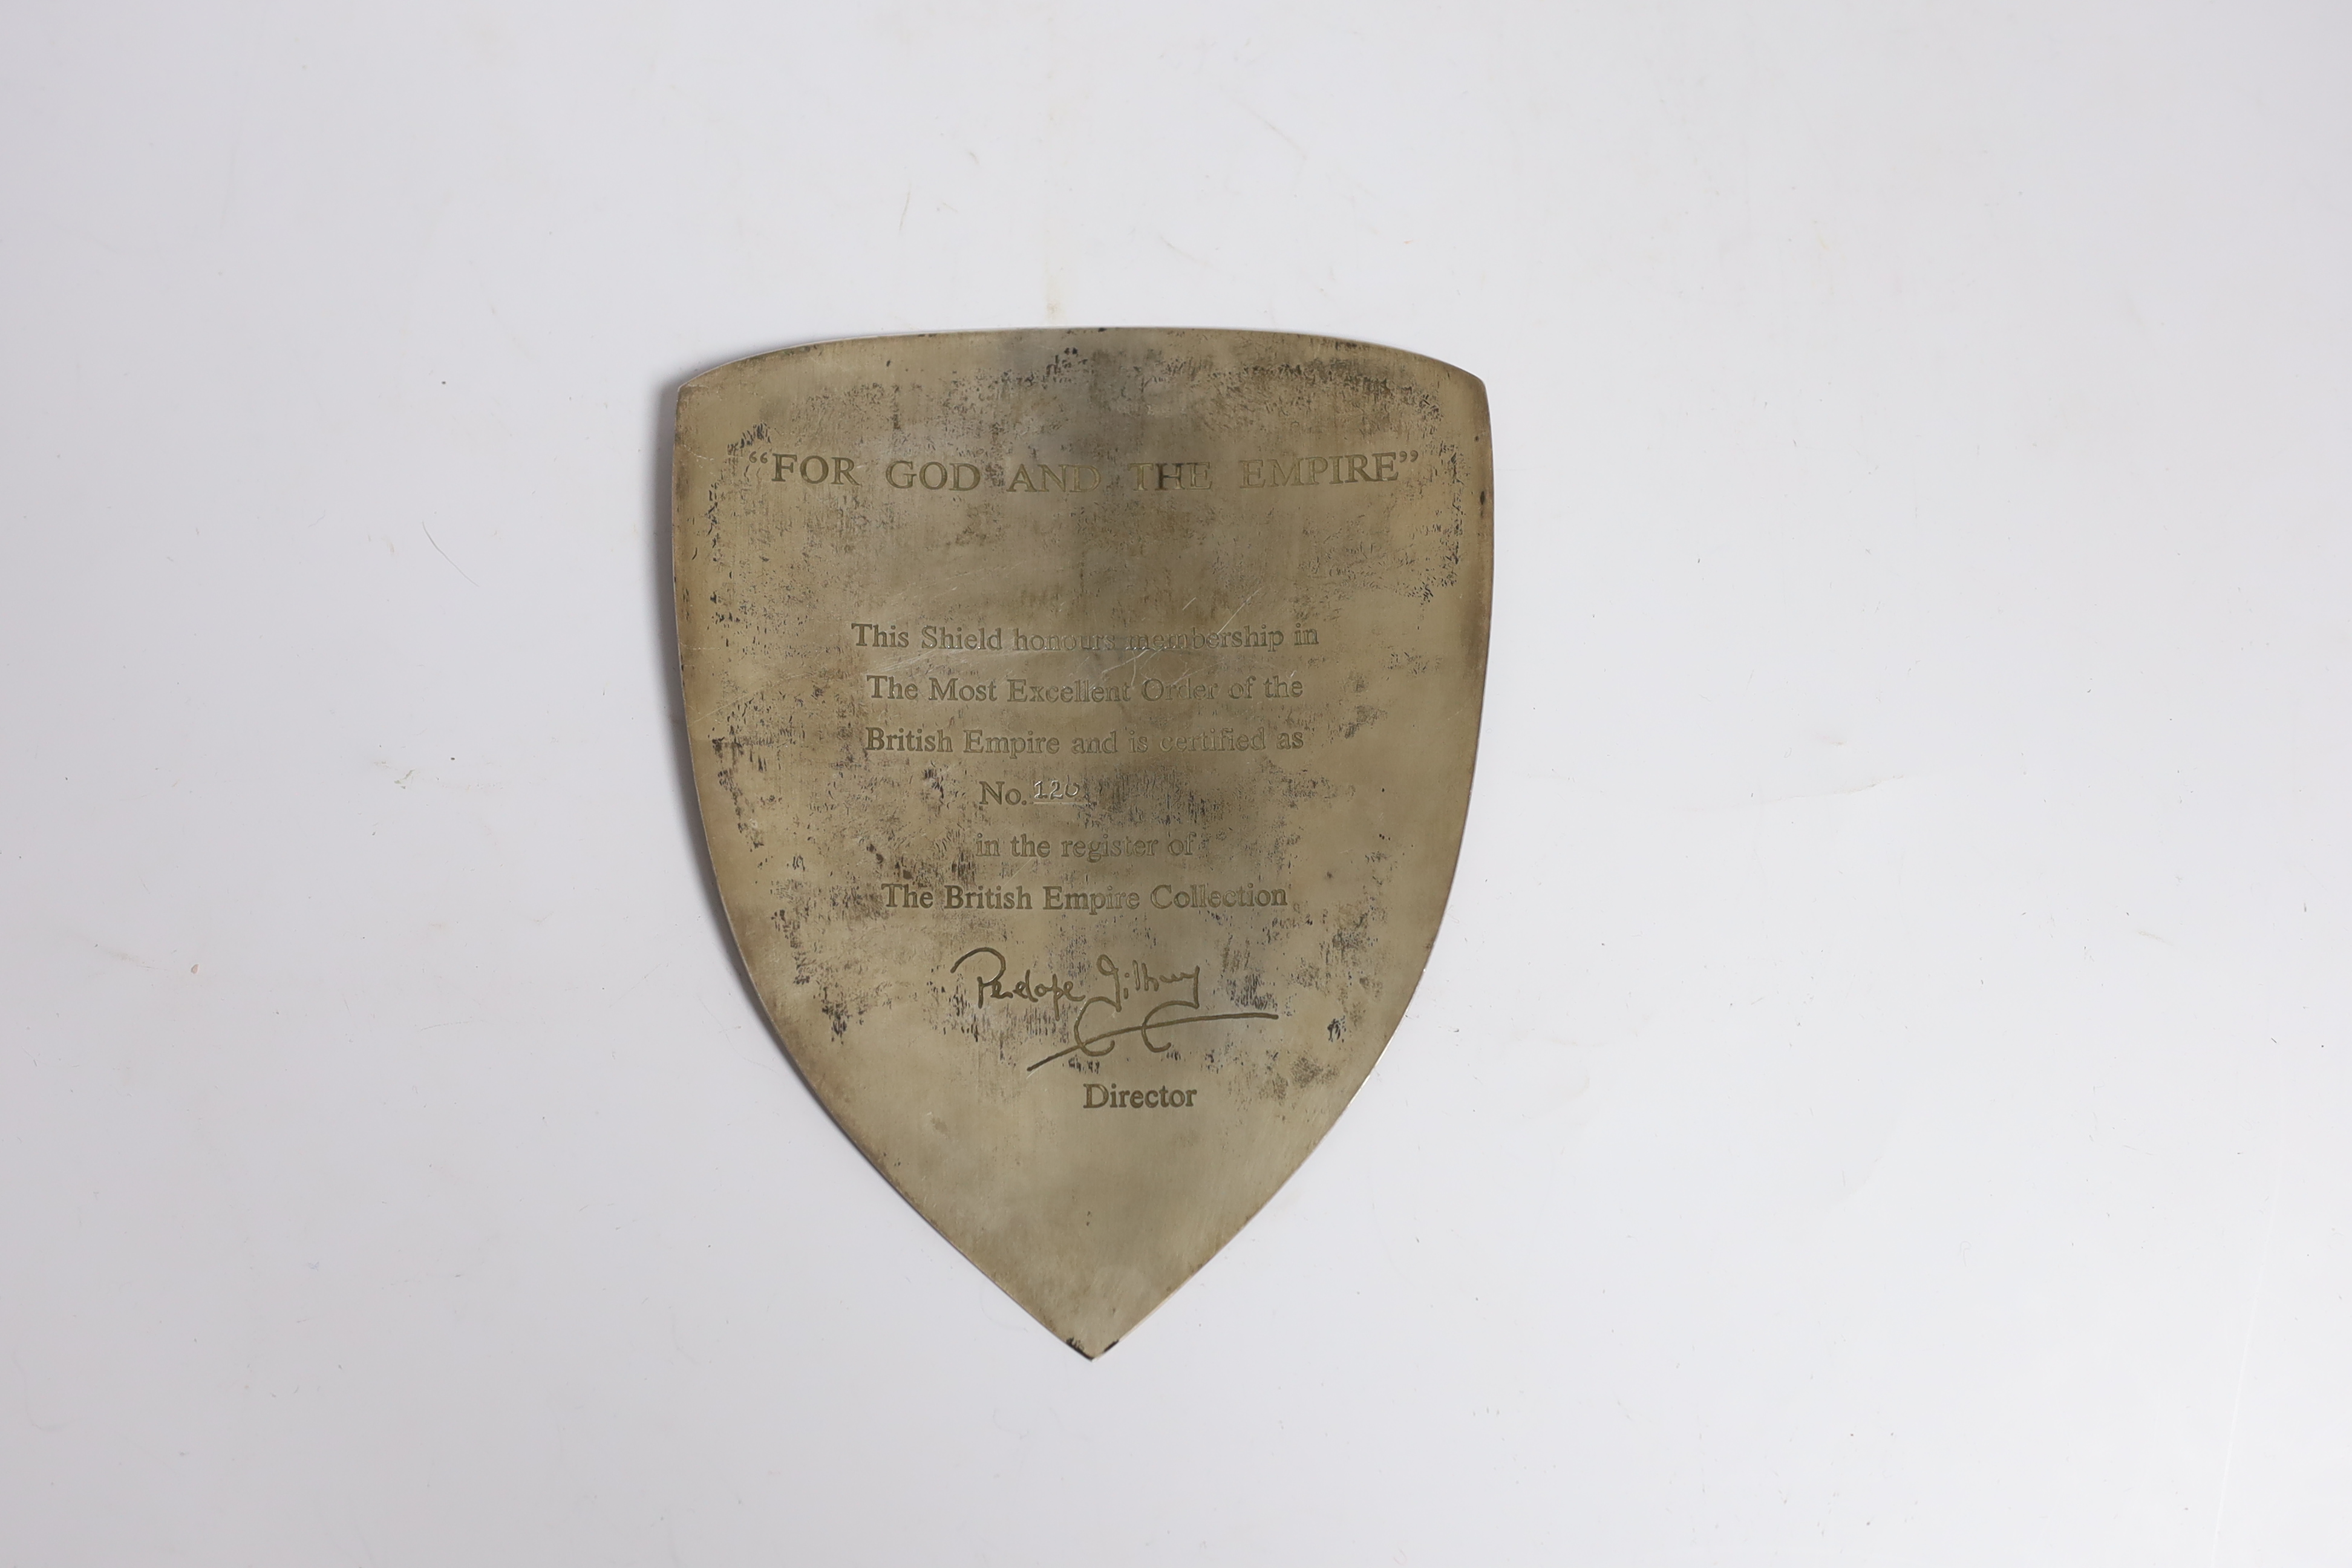 A modern silver shield plaque, engraved 'For God and The Empire. This shield honours membership in The Most Excellent Order of the British Empire and is certified as No. 102 in the register of The British Empire Collecti